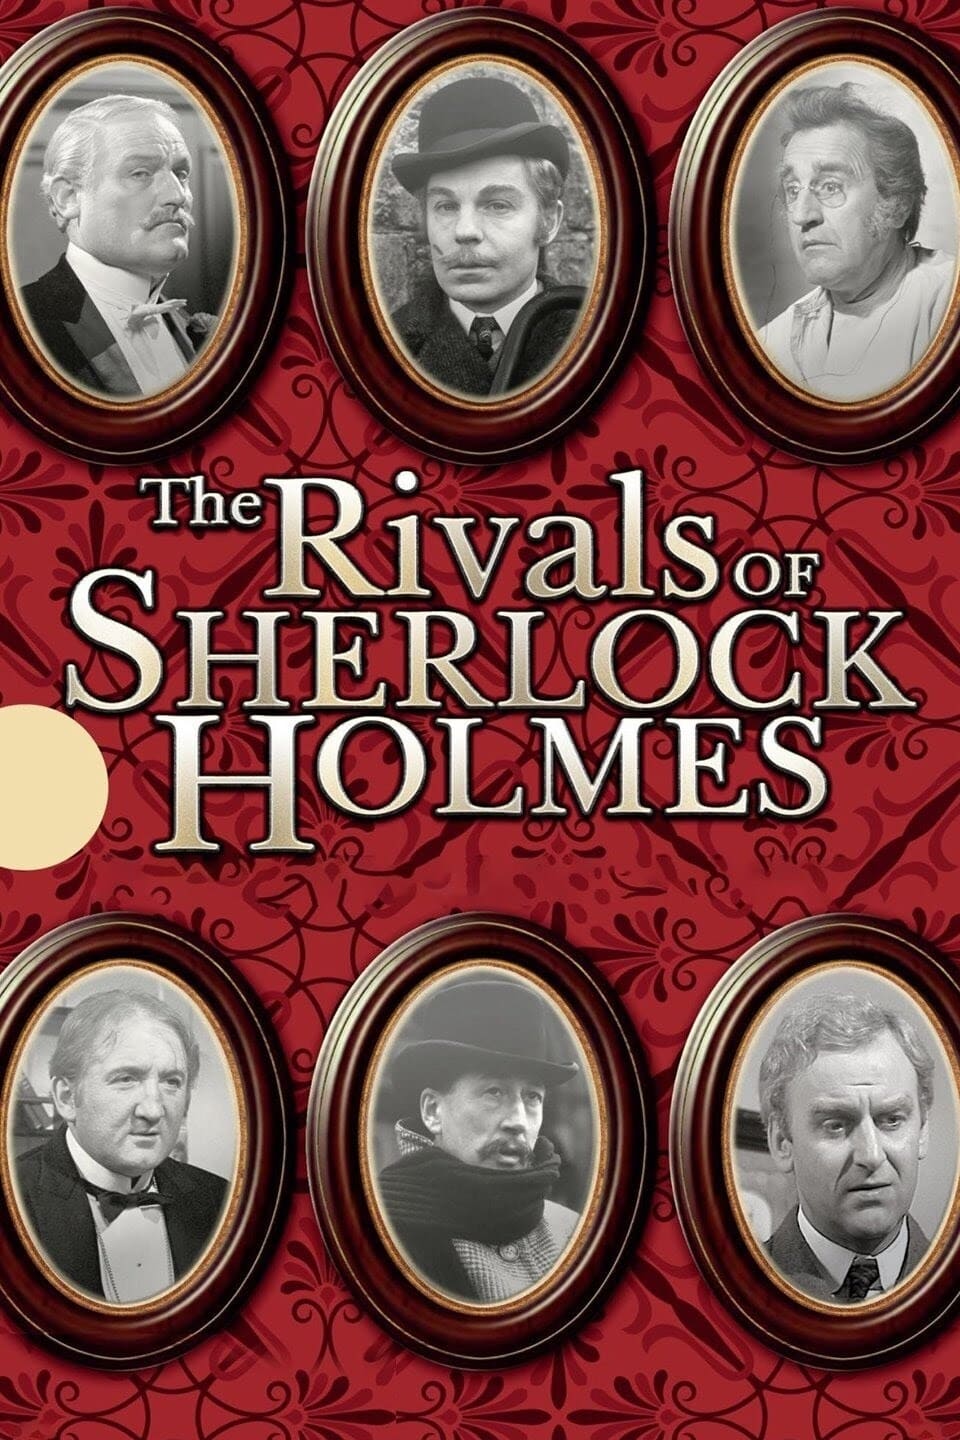 The Rivals of Sherlock Holmes (1971)